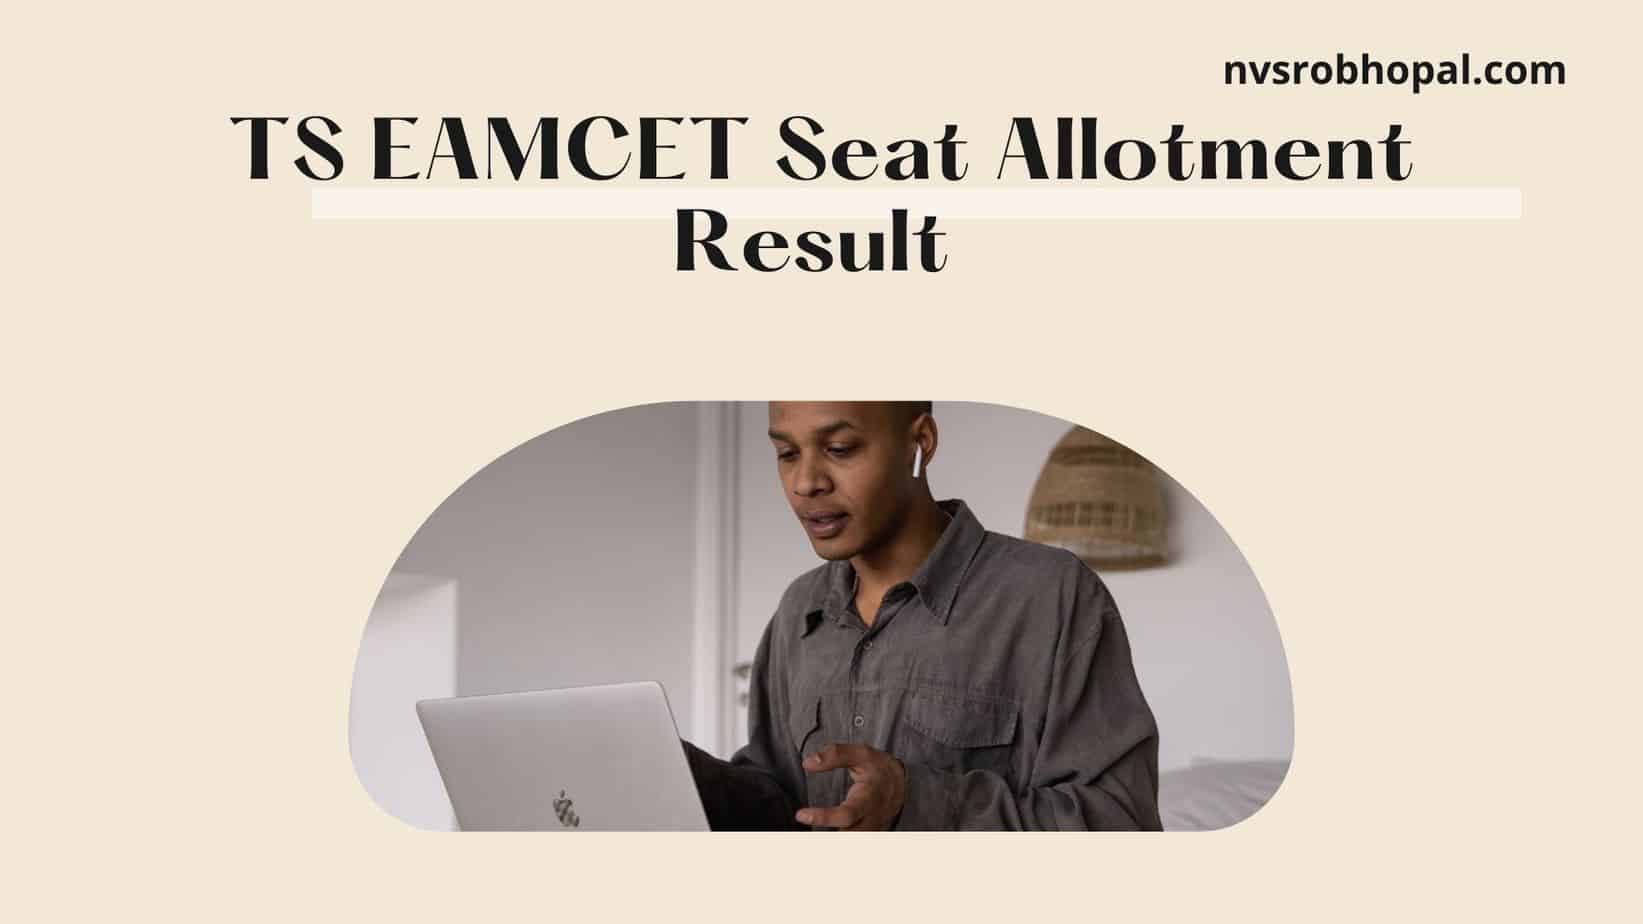 TS EAMCET 1st Phase Seat Allotment Result